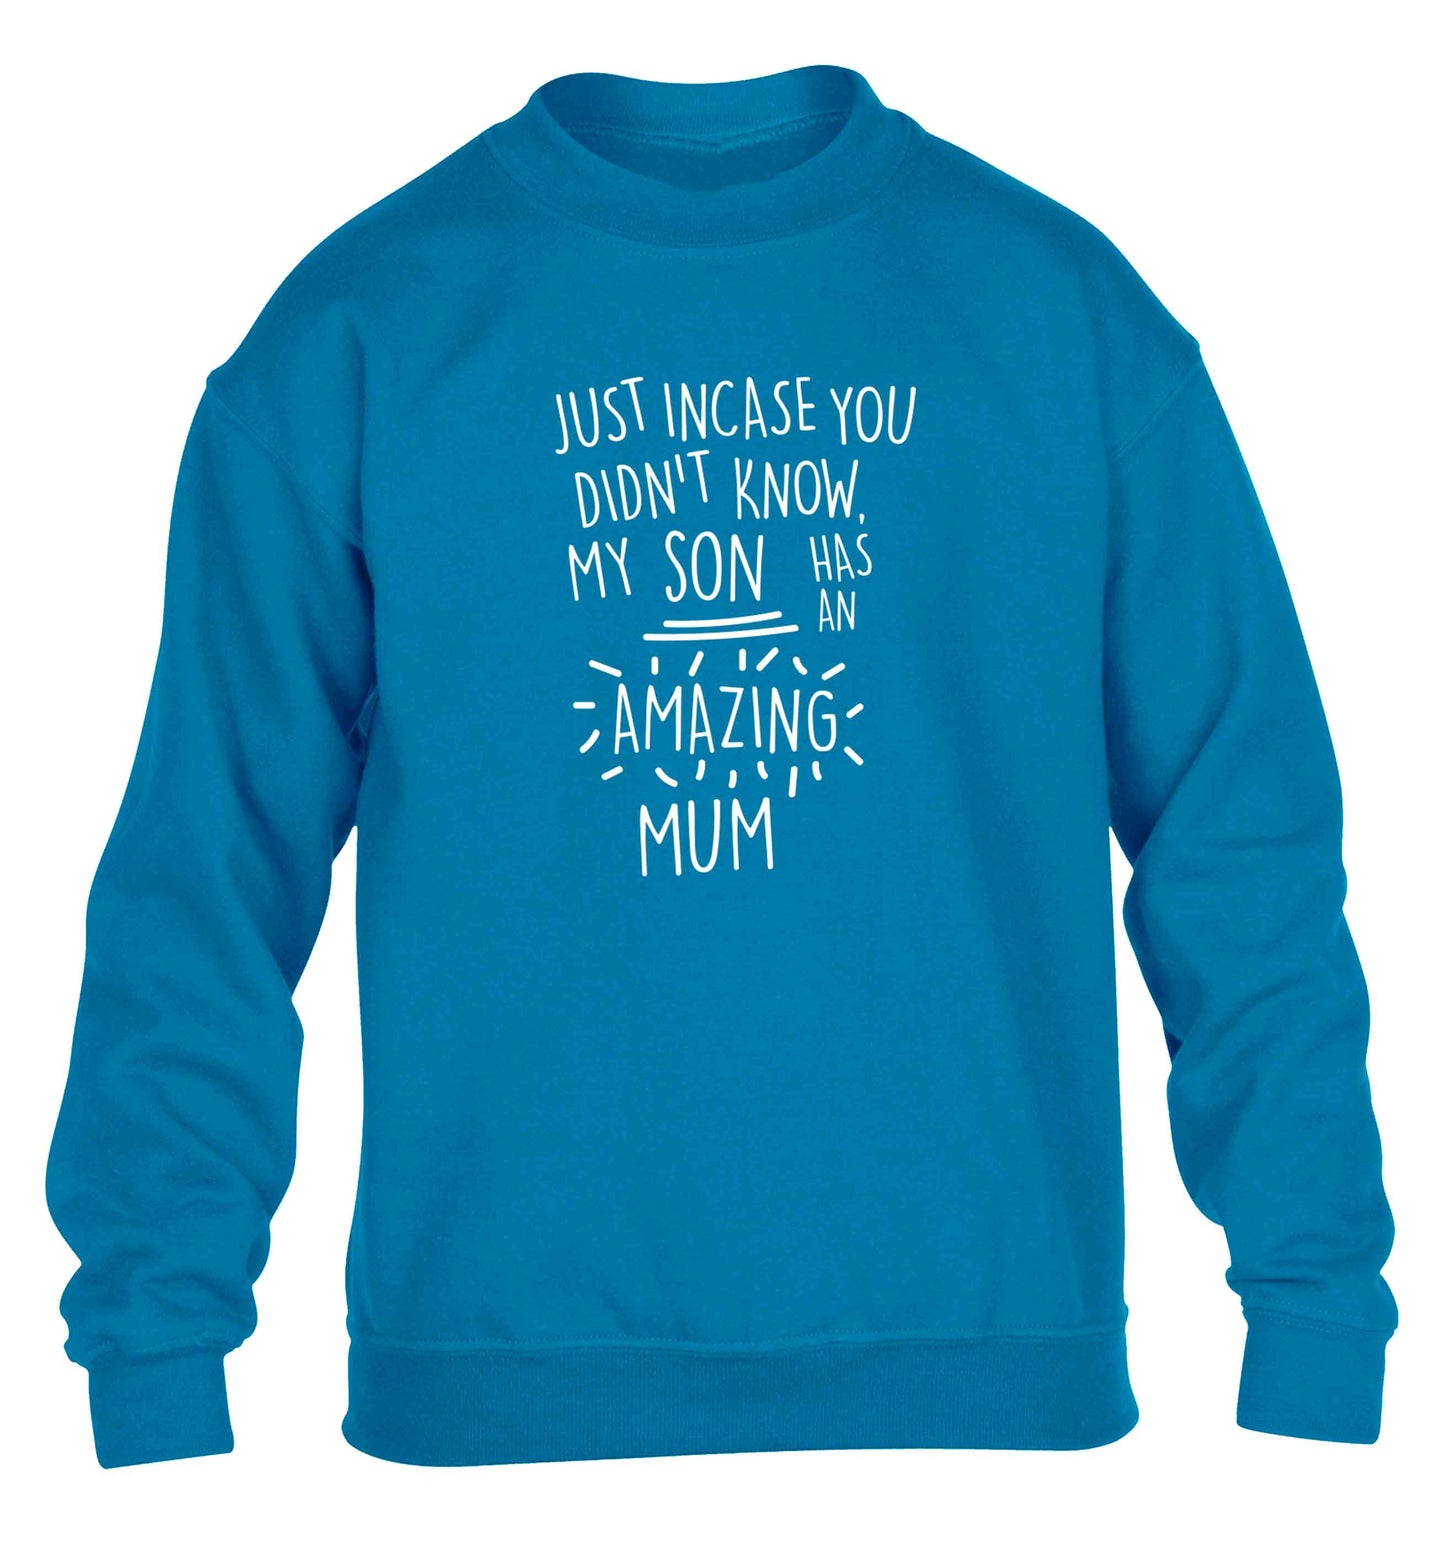 Just incase you didn't know my son has an amazing mum children's blue sweater 12-13 Years